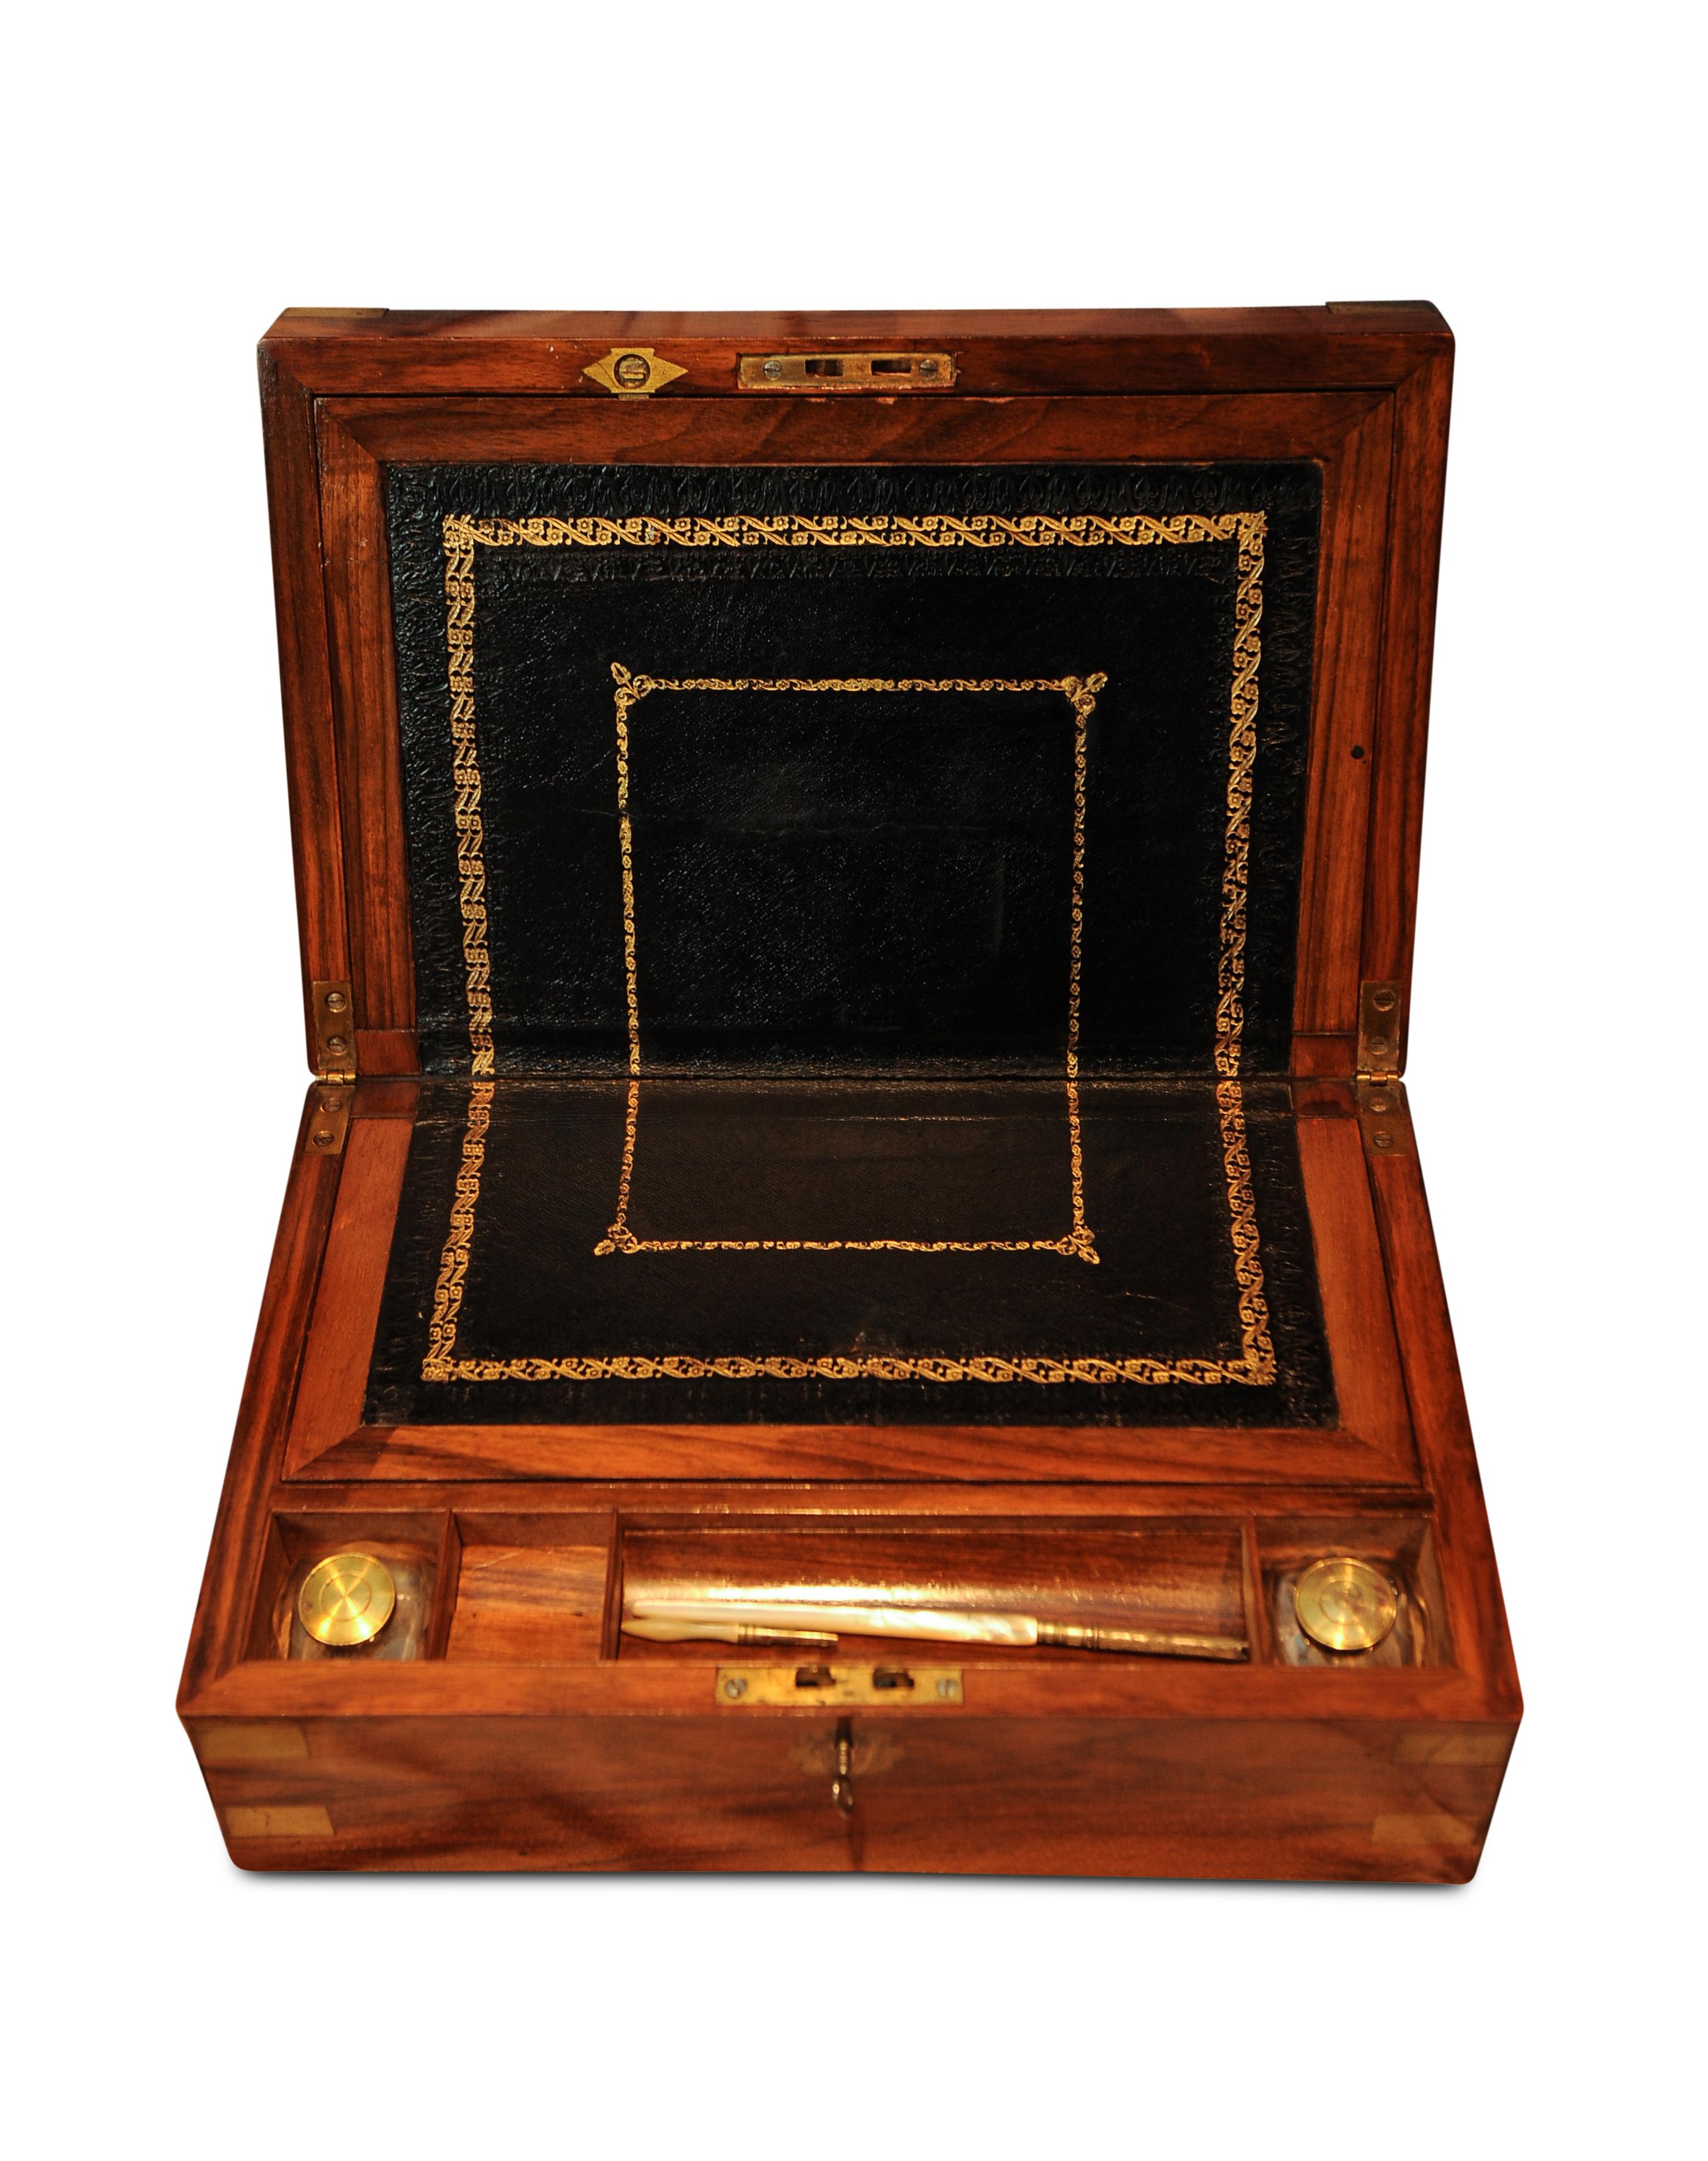 A military Campaign brass bound walnut veneered writing slope, with flower front motif. 
Opening up to reveal the usual fitted interior with embossed black leather top.
With two glass ink pots in separate compartments with brass lids.
Key